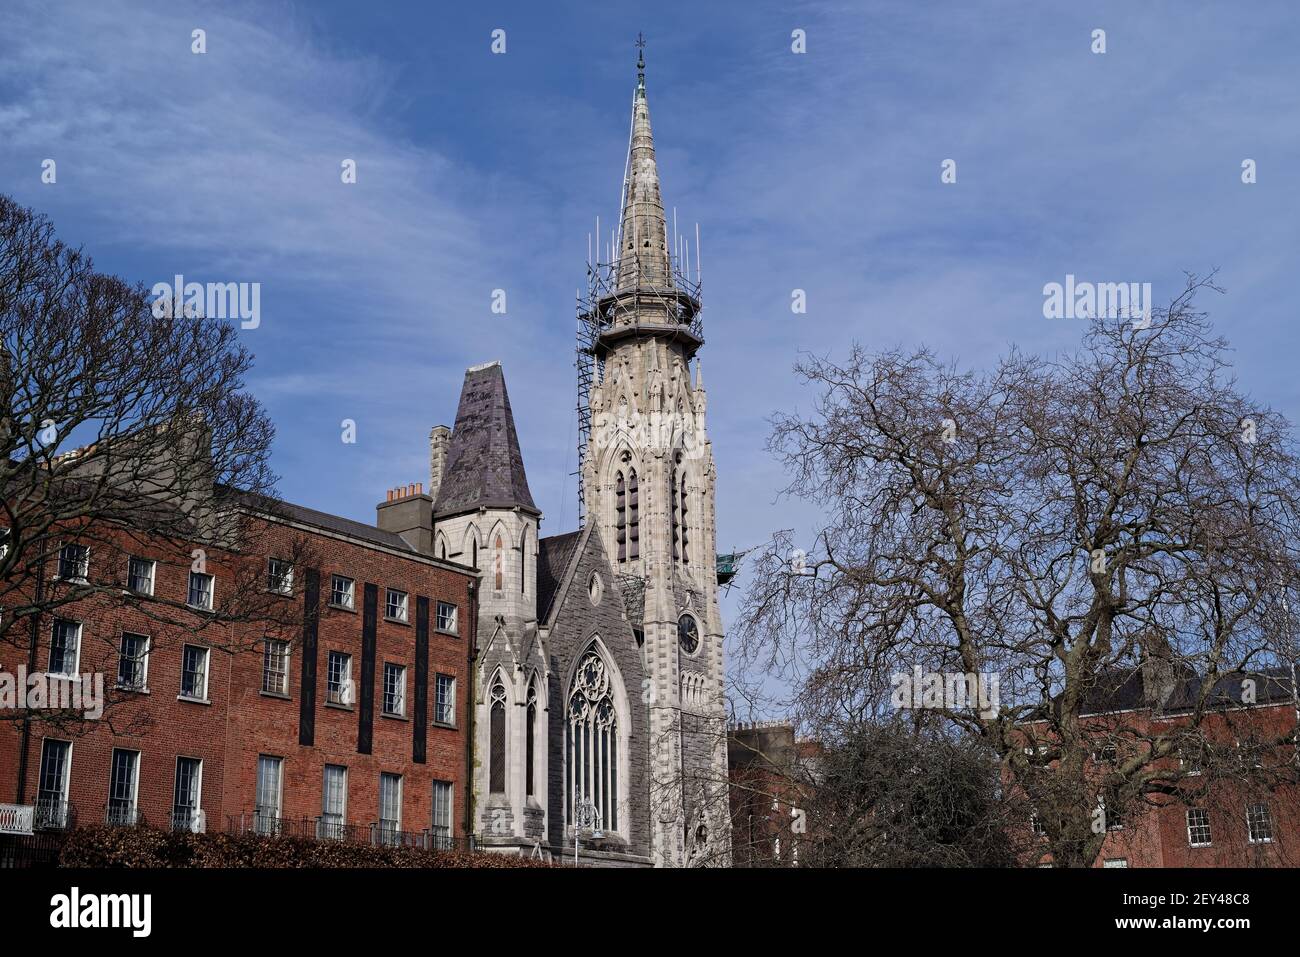 DUBLIN, IRELAND - Mar 05, 2020: The Abbey Presbyterian Church in Dublin on sunny winter day.. The building during renovation with scaffolding around t Stock Photo